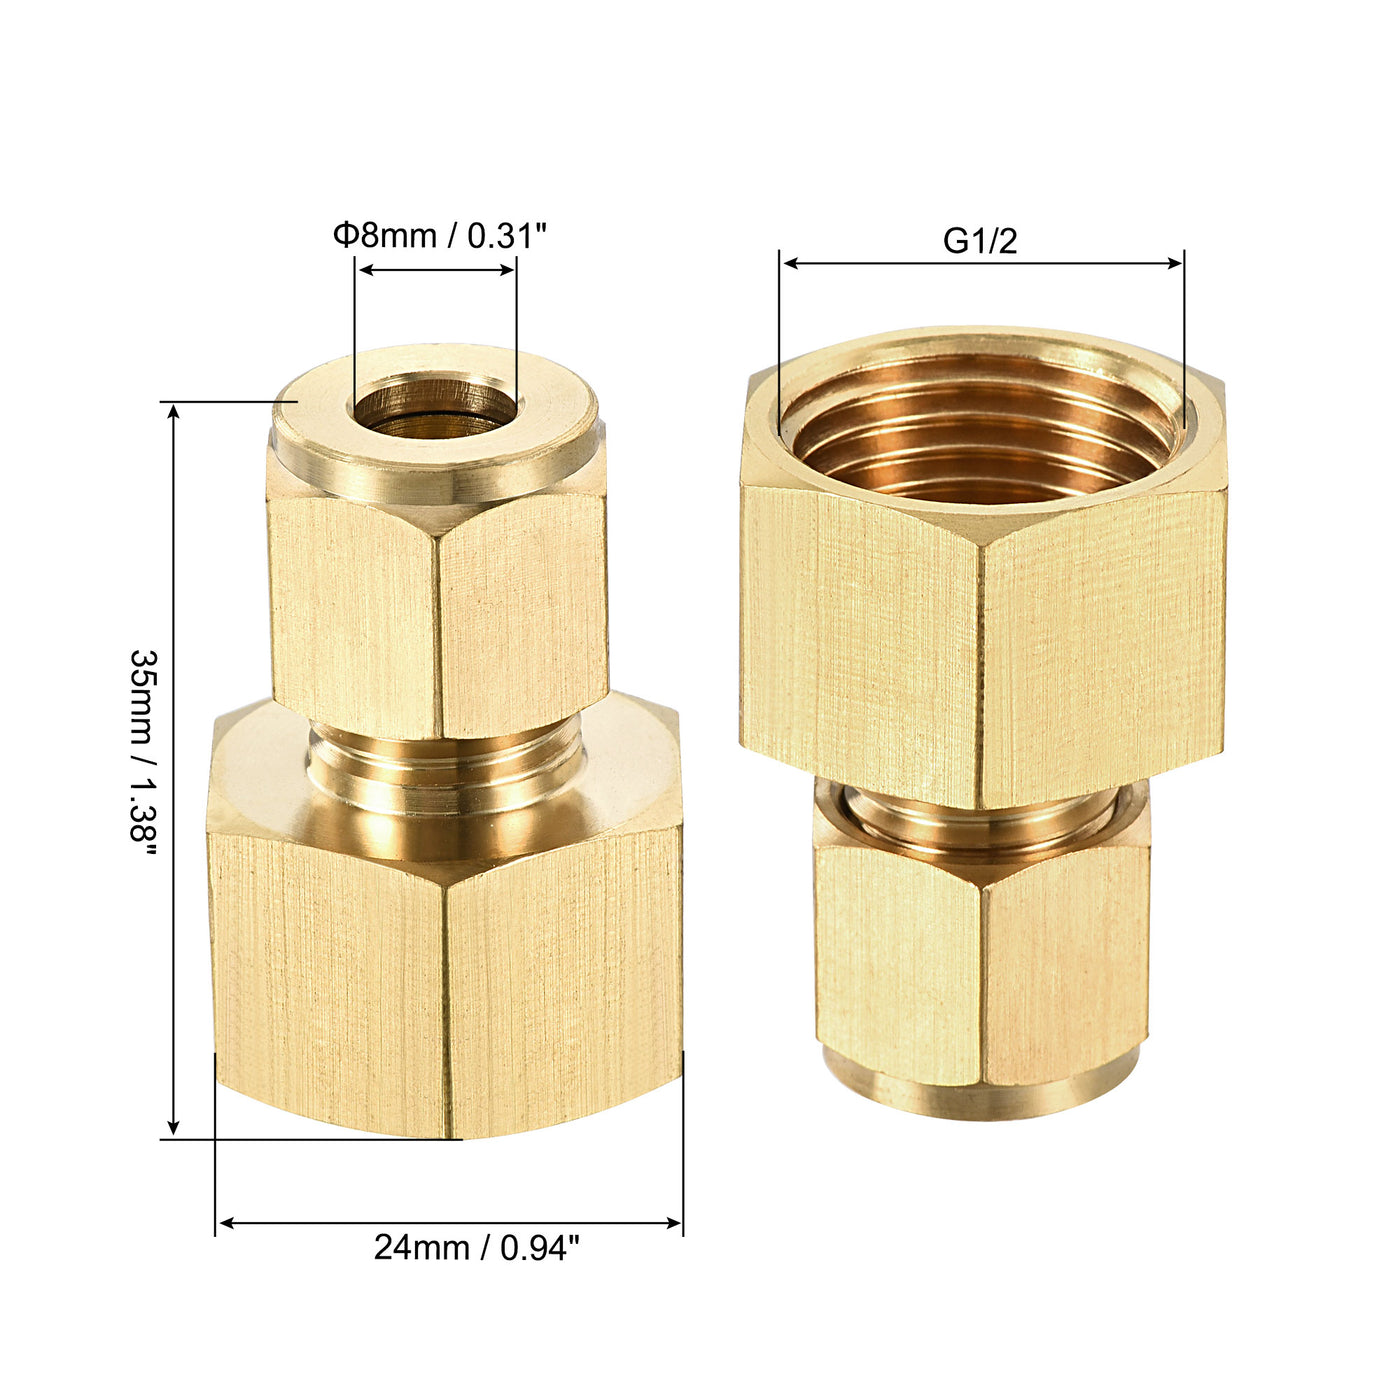 Uxcell Uxcell Compression Tube Fitting G1/2 Female Thread x 12mm Tube OD Straight Coupling Adapter Brass